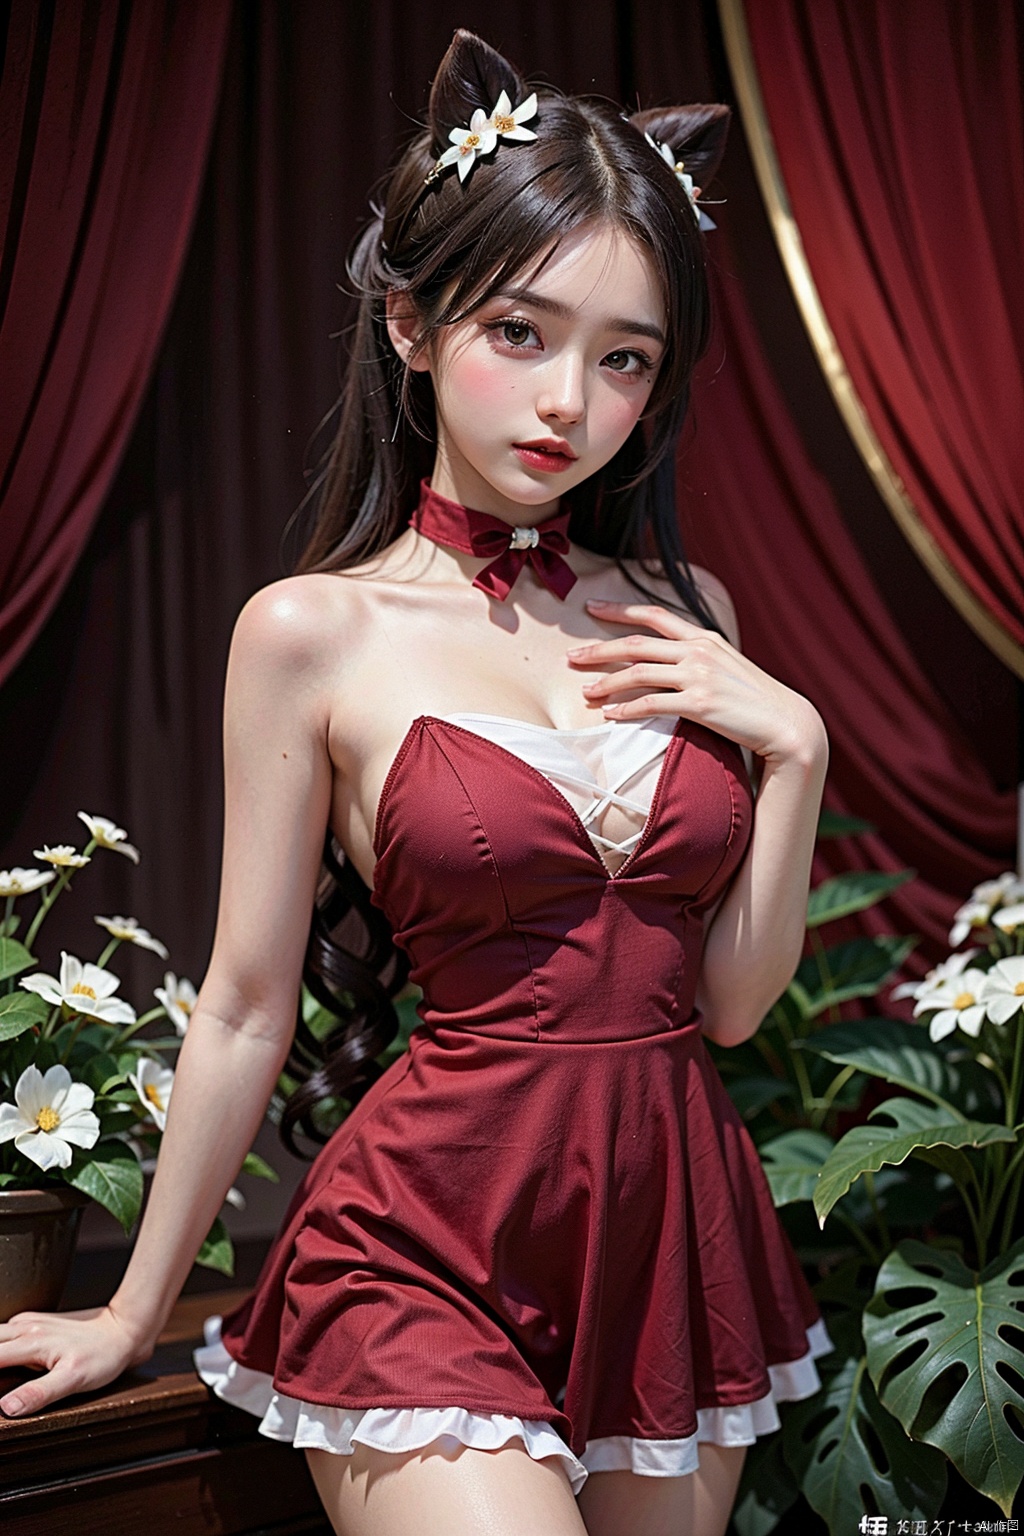 The image is a beautifully composed portrait of a young woman in a striking red dress,holding a delicate pink flower. The lighting is soft and flattering,creating a warm and inviting atmosphere. The colors are vibrant and vivid,with the woman's red dress standing out against the backdrop of a lush green garden. The photograph exudes elegance and grace,with the woman's gentle expression conveying a sense of serenity and poise. The quality of the image is top-notch,with every detail captured in exquisite detail. The portrait is a testament to the photographer's exceptional talent and skill in capturing the essence of a subject in a single frame,creating images that are aesthetically pleasing and emotionally resonant.